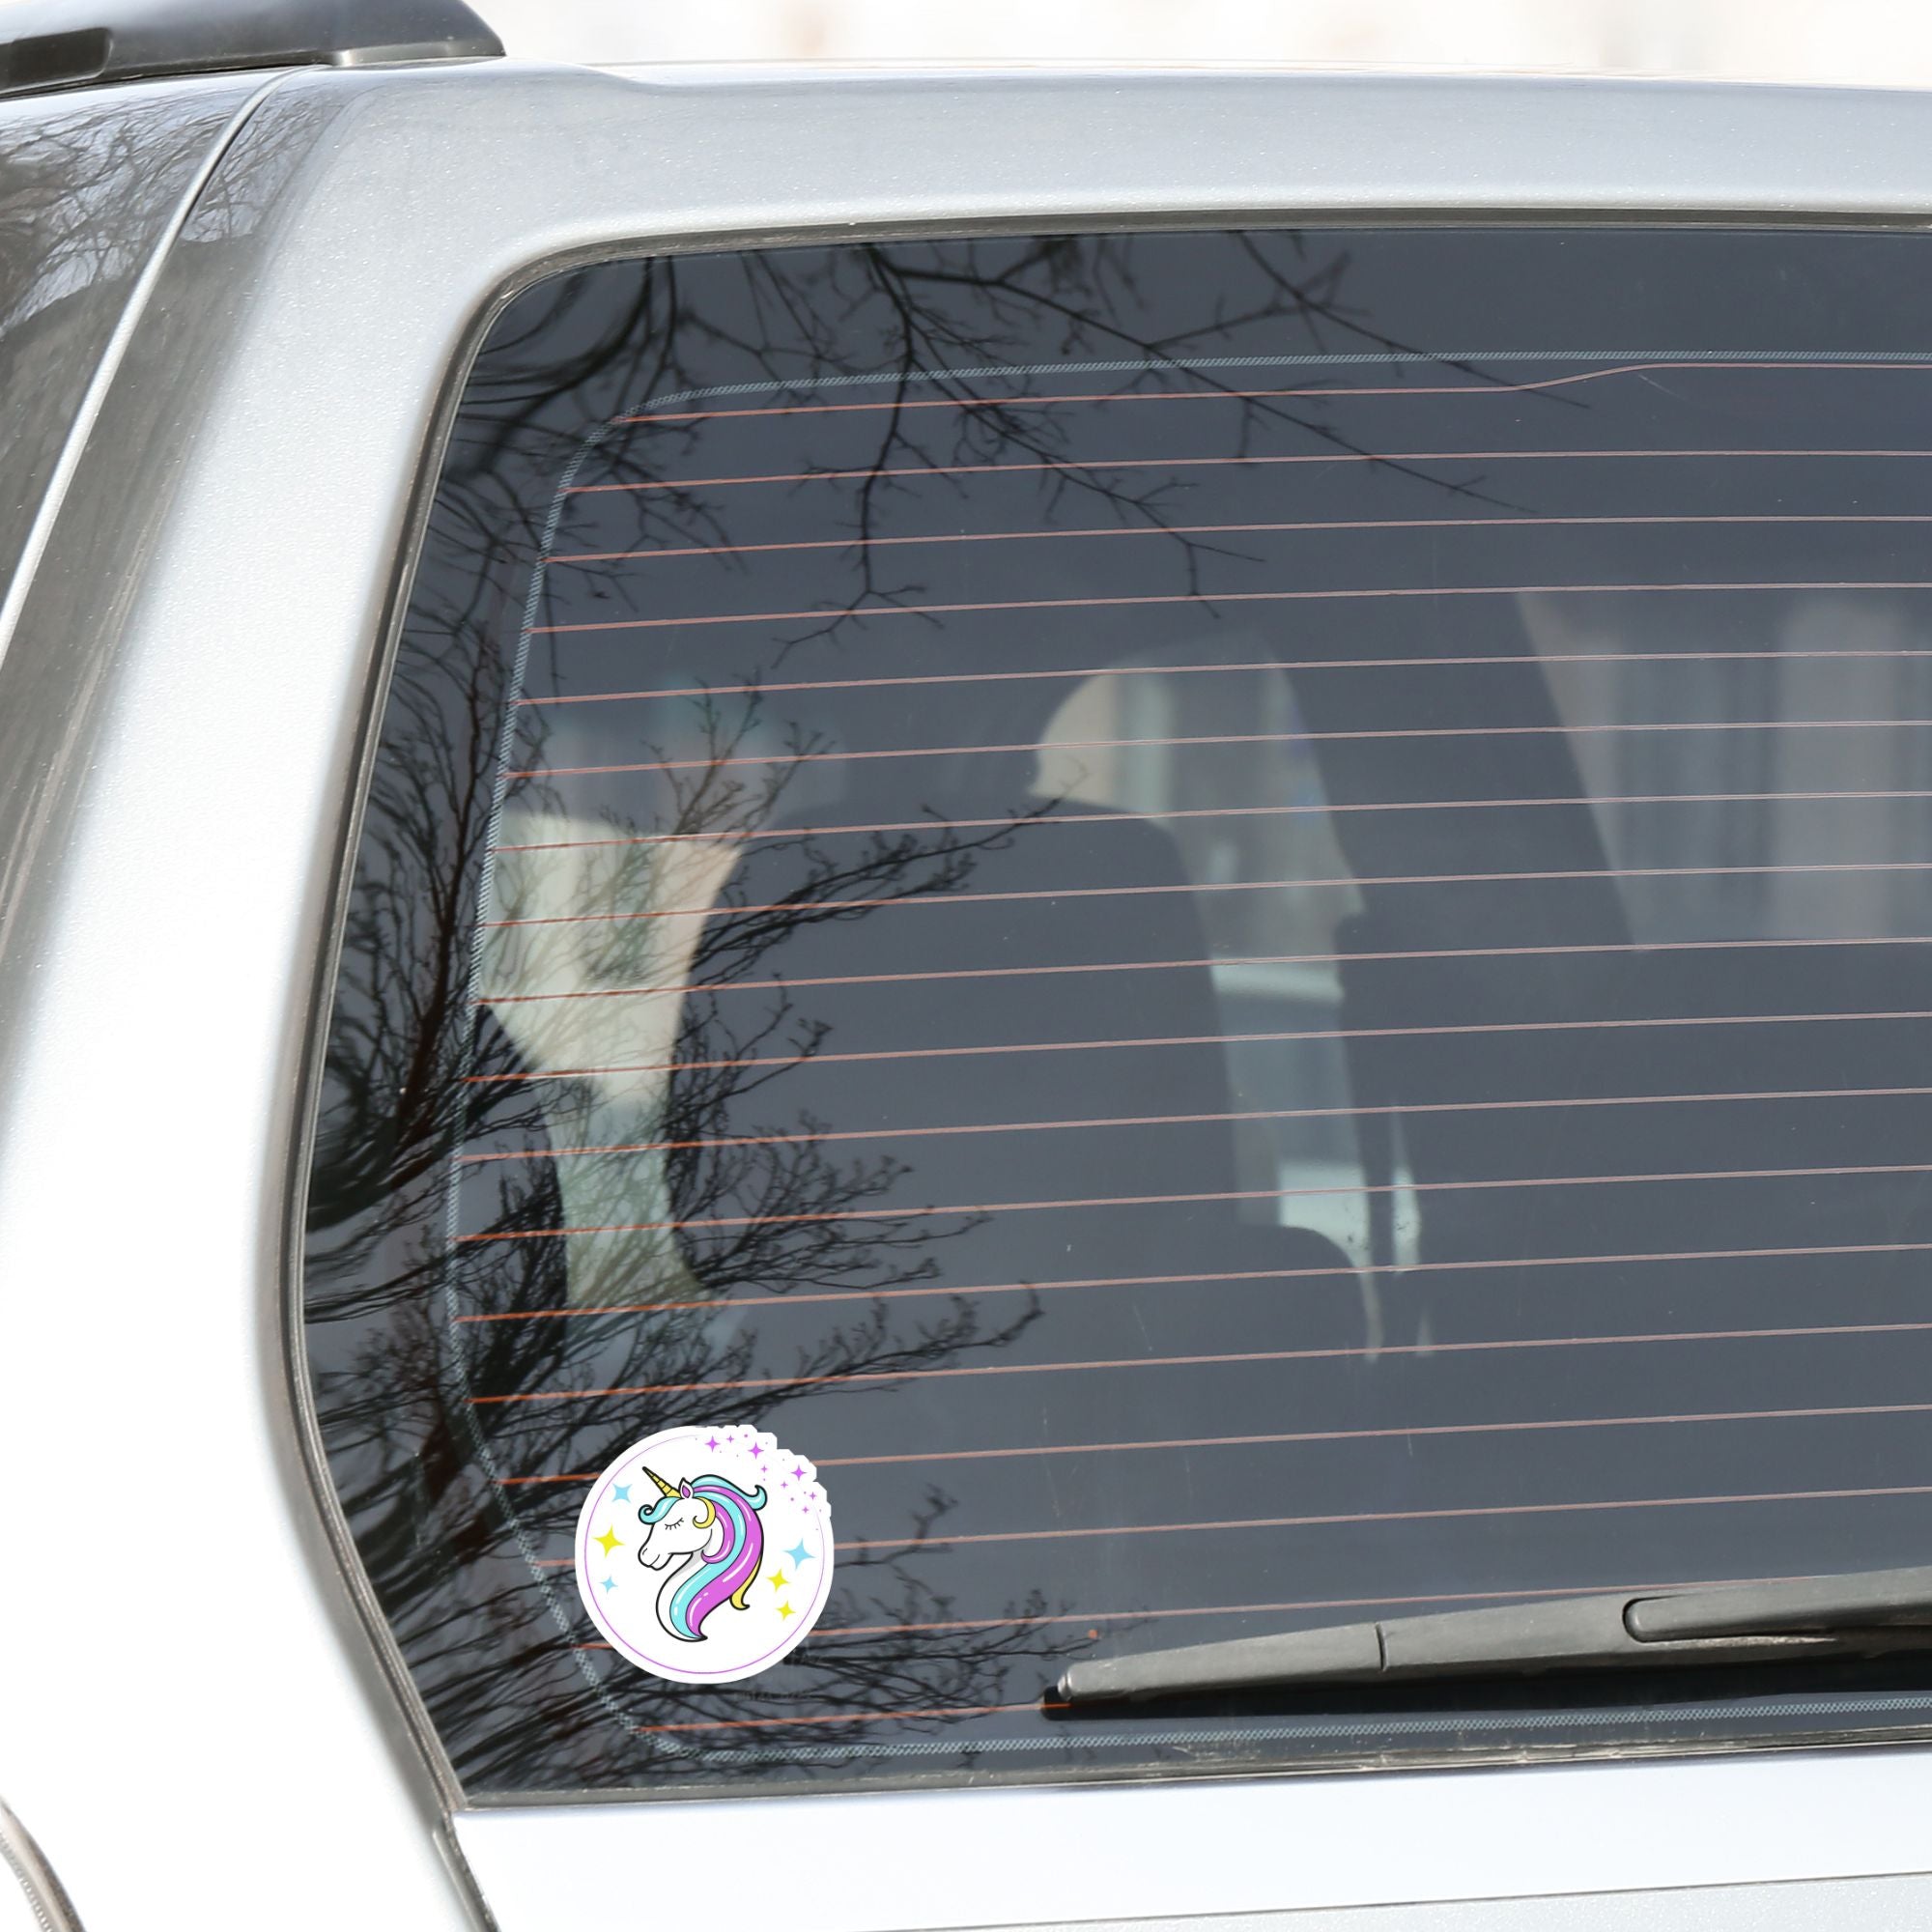 This individual die-cut sticker features a teal and purple unicorn with stars in the background. This image shows the teal and purple Unicorn sticker on the back window of a car.